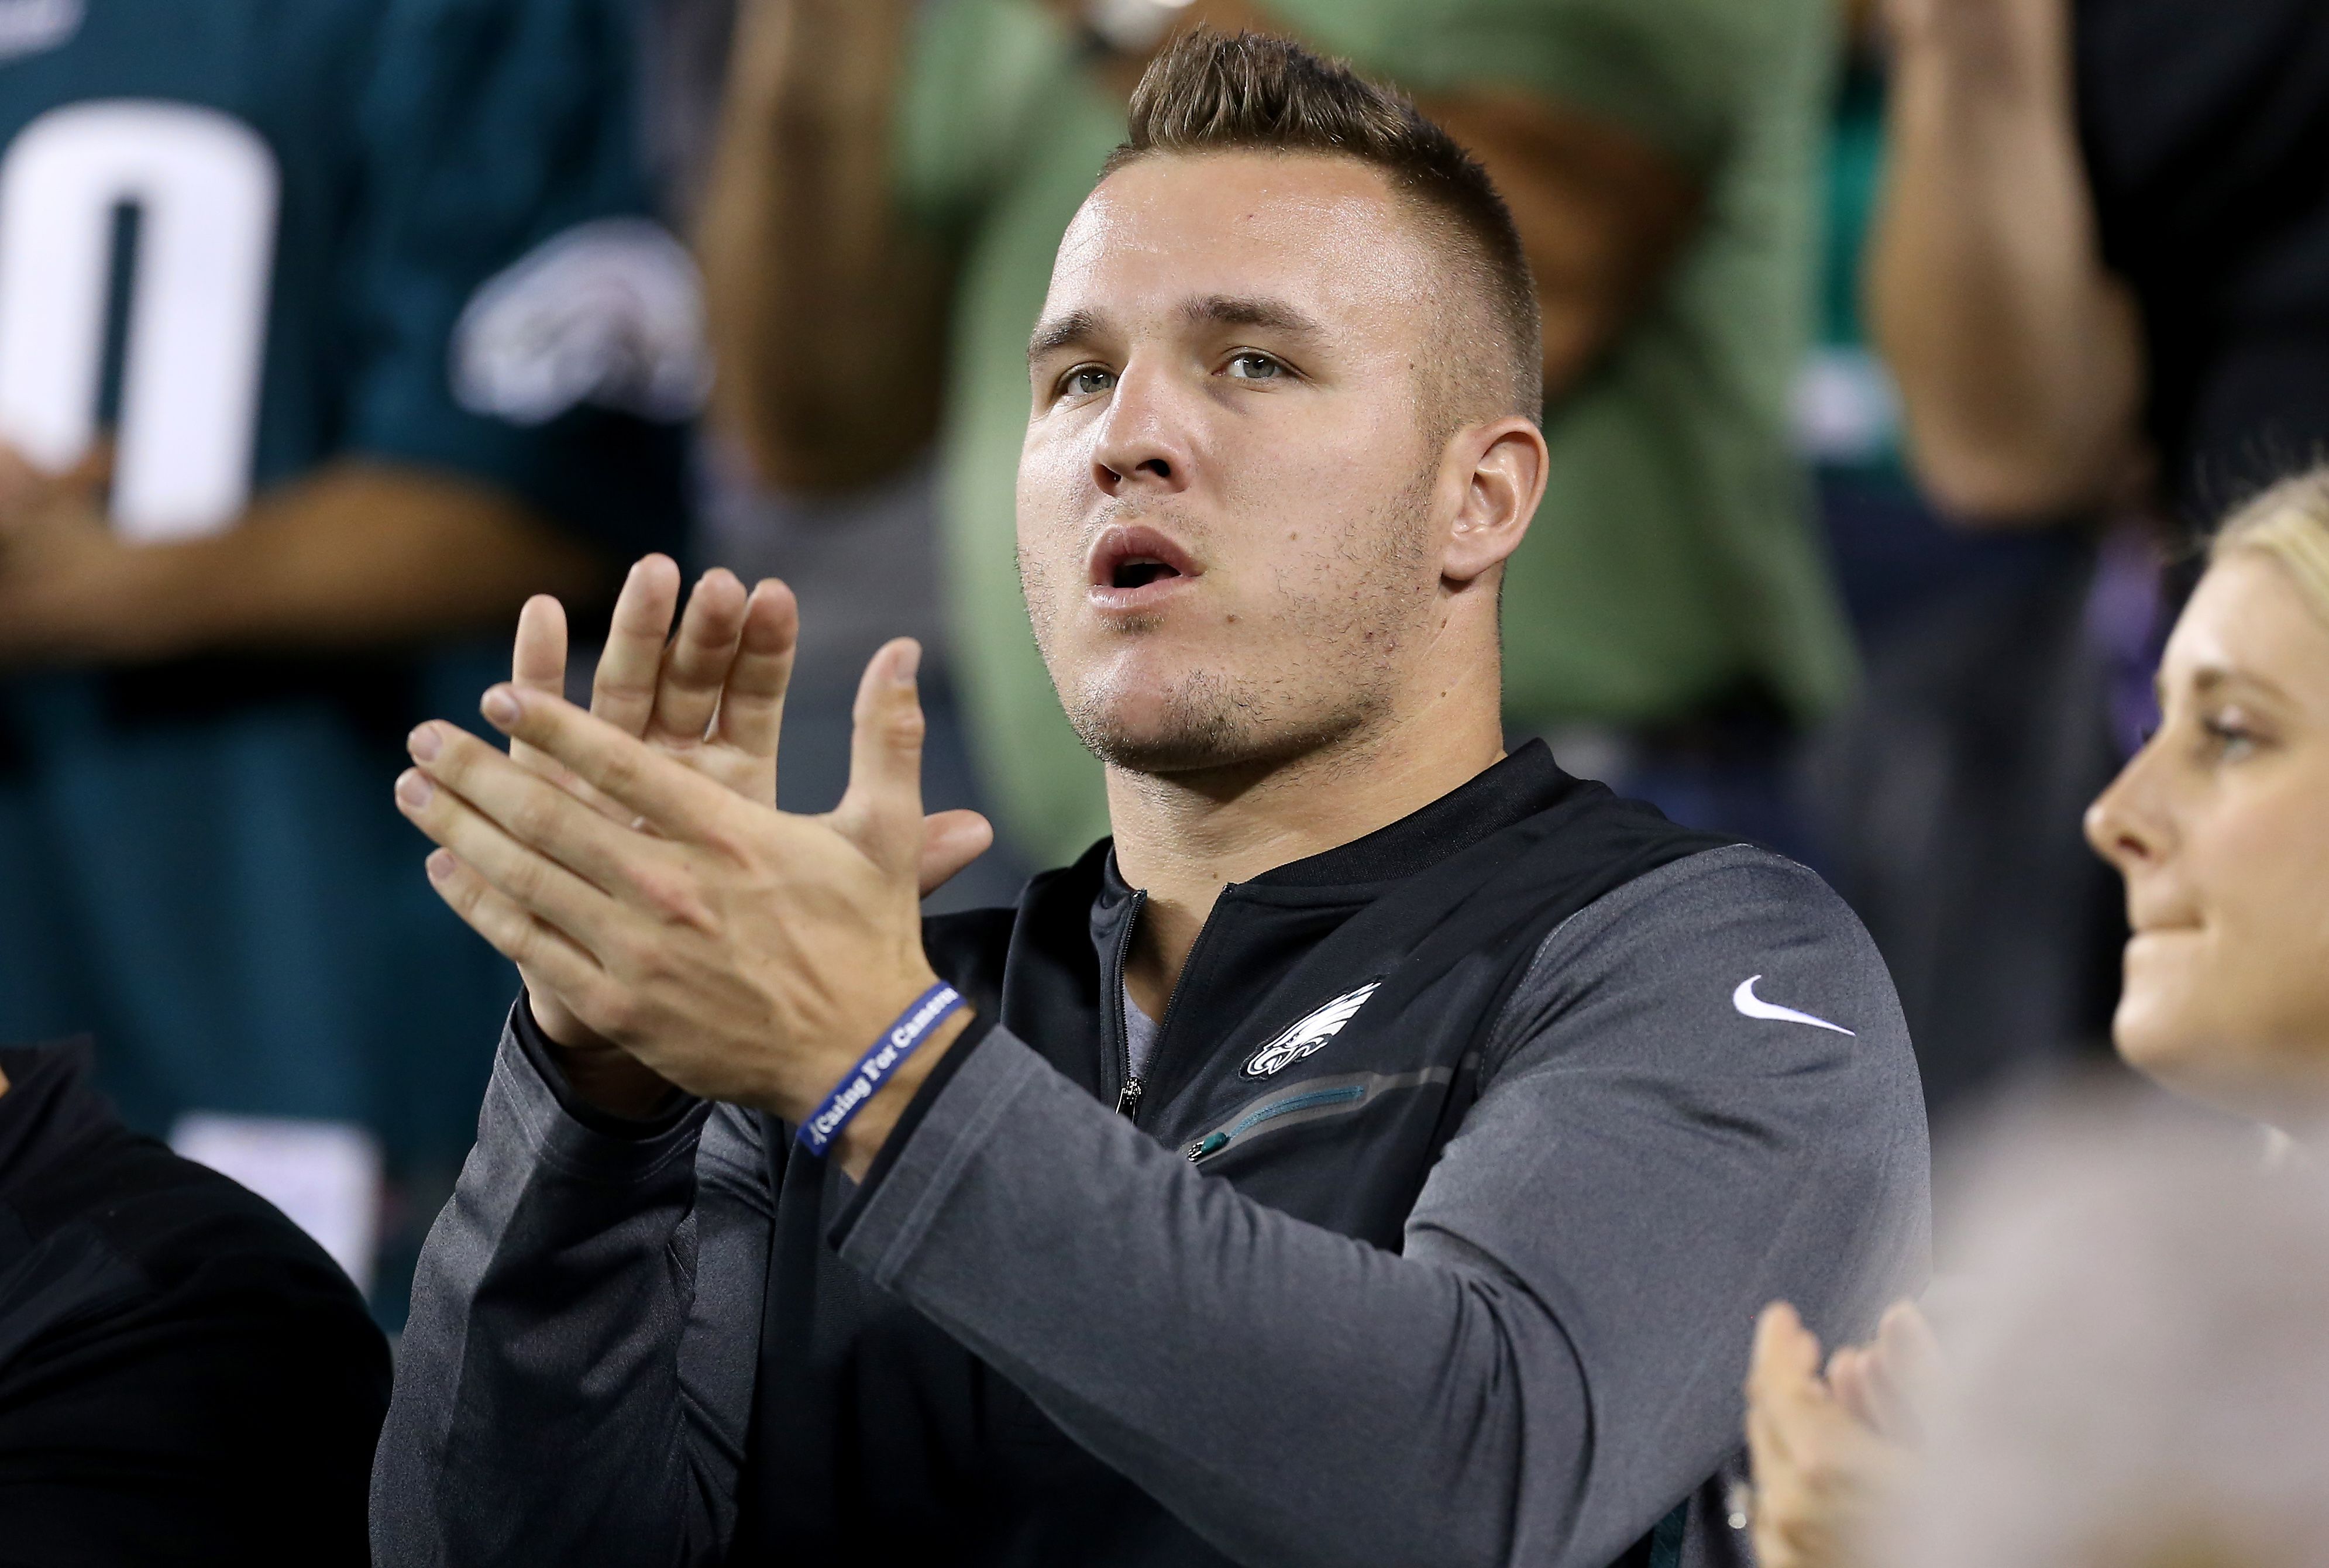 Mike Trout Shares His Thoughts on the Eagles' Offseason Moves